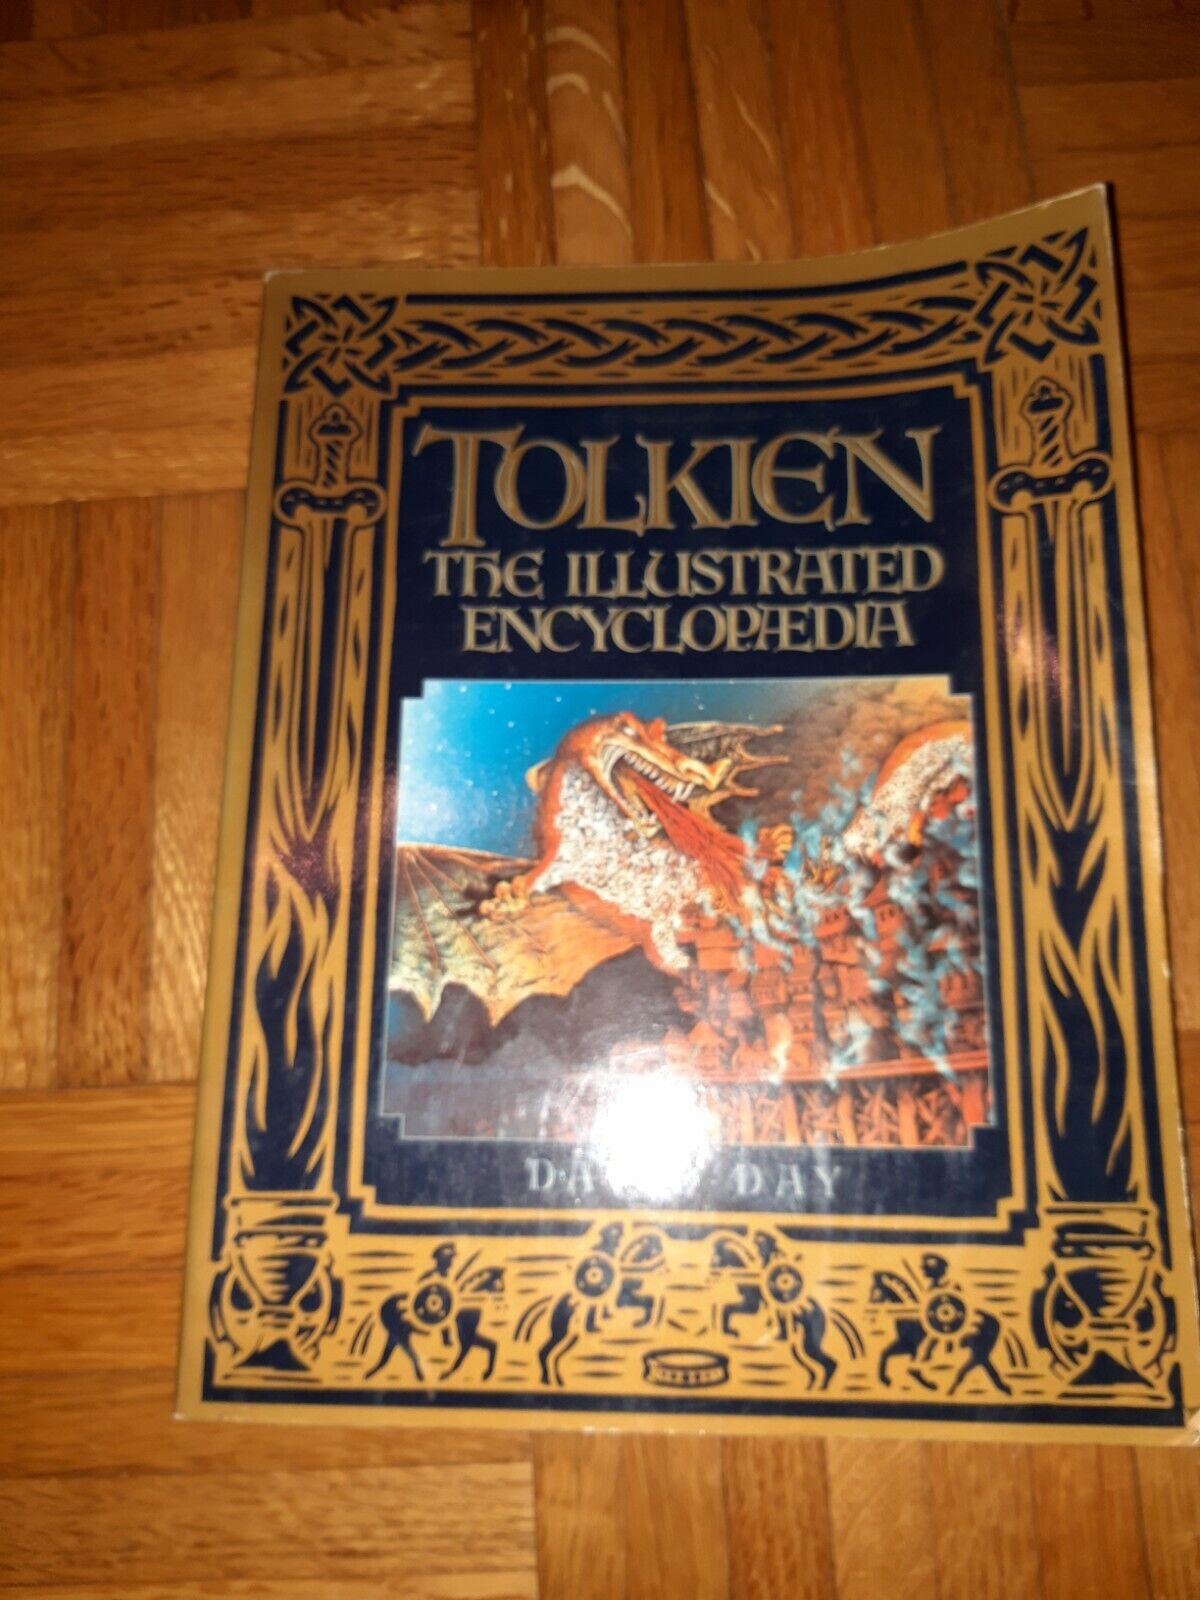 Tolkien The Illustrated Encyclopedia  David Day Lord of the Rings Hobbit 